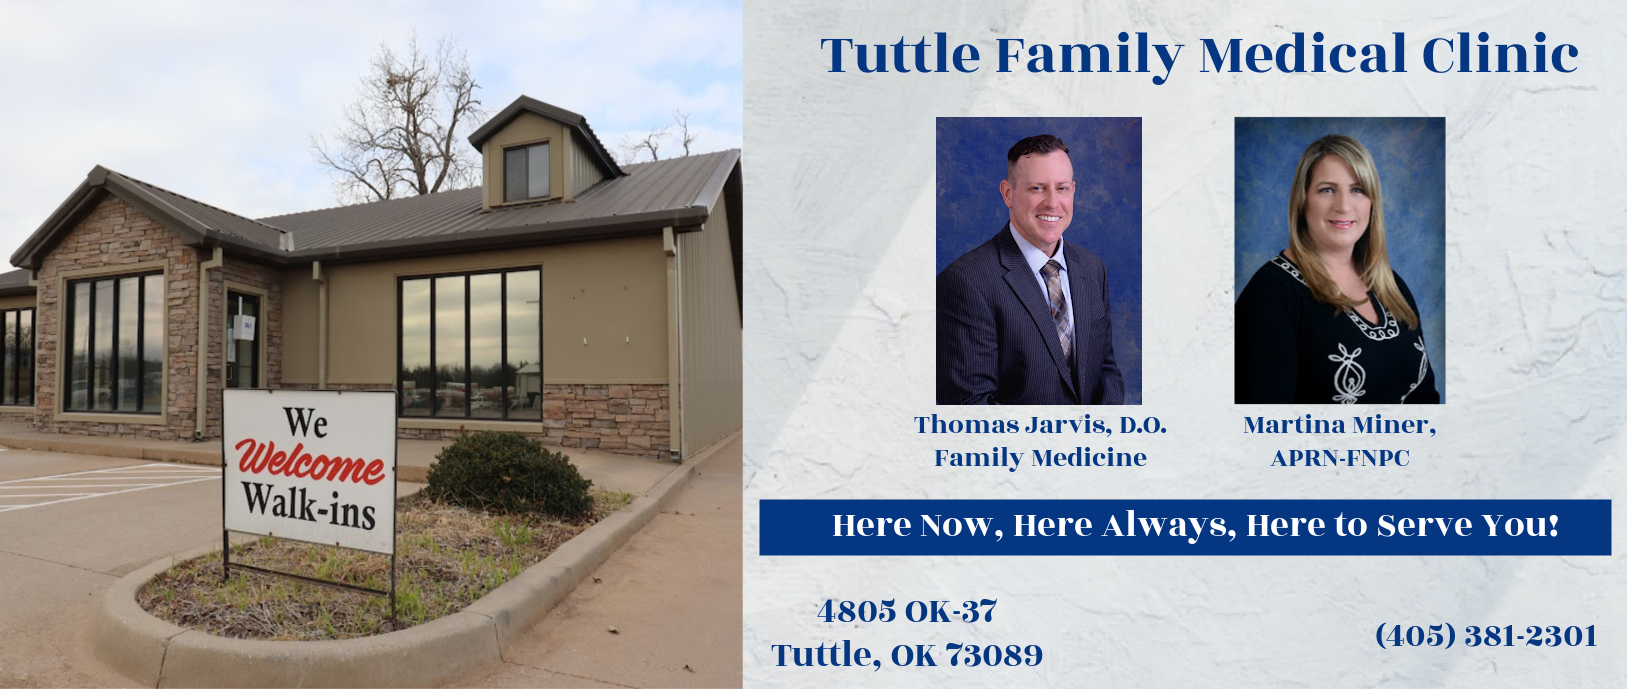 Tuttle Family Medical Clinic

Thomas Jarvis, family medicine- 
Martina Niner, APRN-FNPC
Julie Utley, PA-C

Here Now, Here Always, Here to Serve You!

4805 OK-37
Tuttle, OK 73089
(405)381-2301